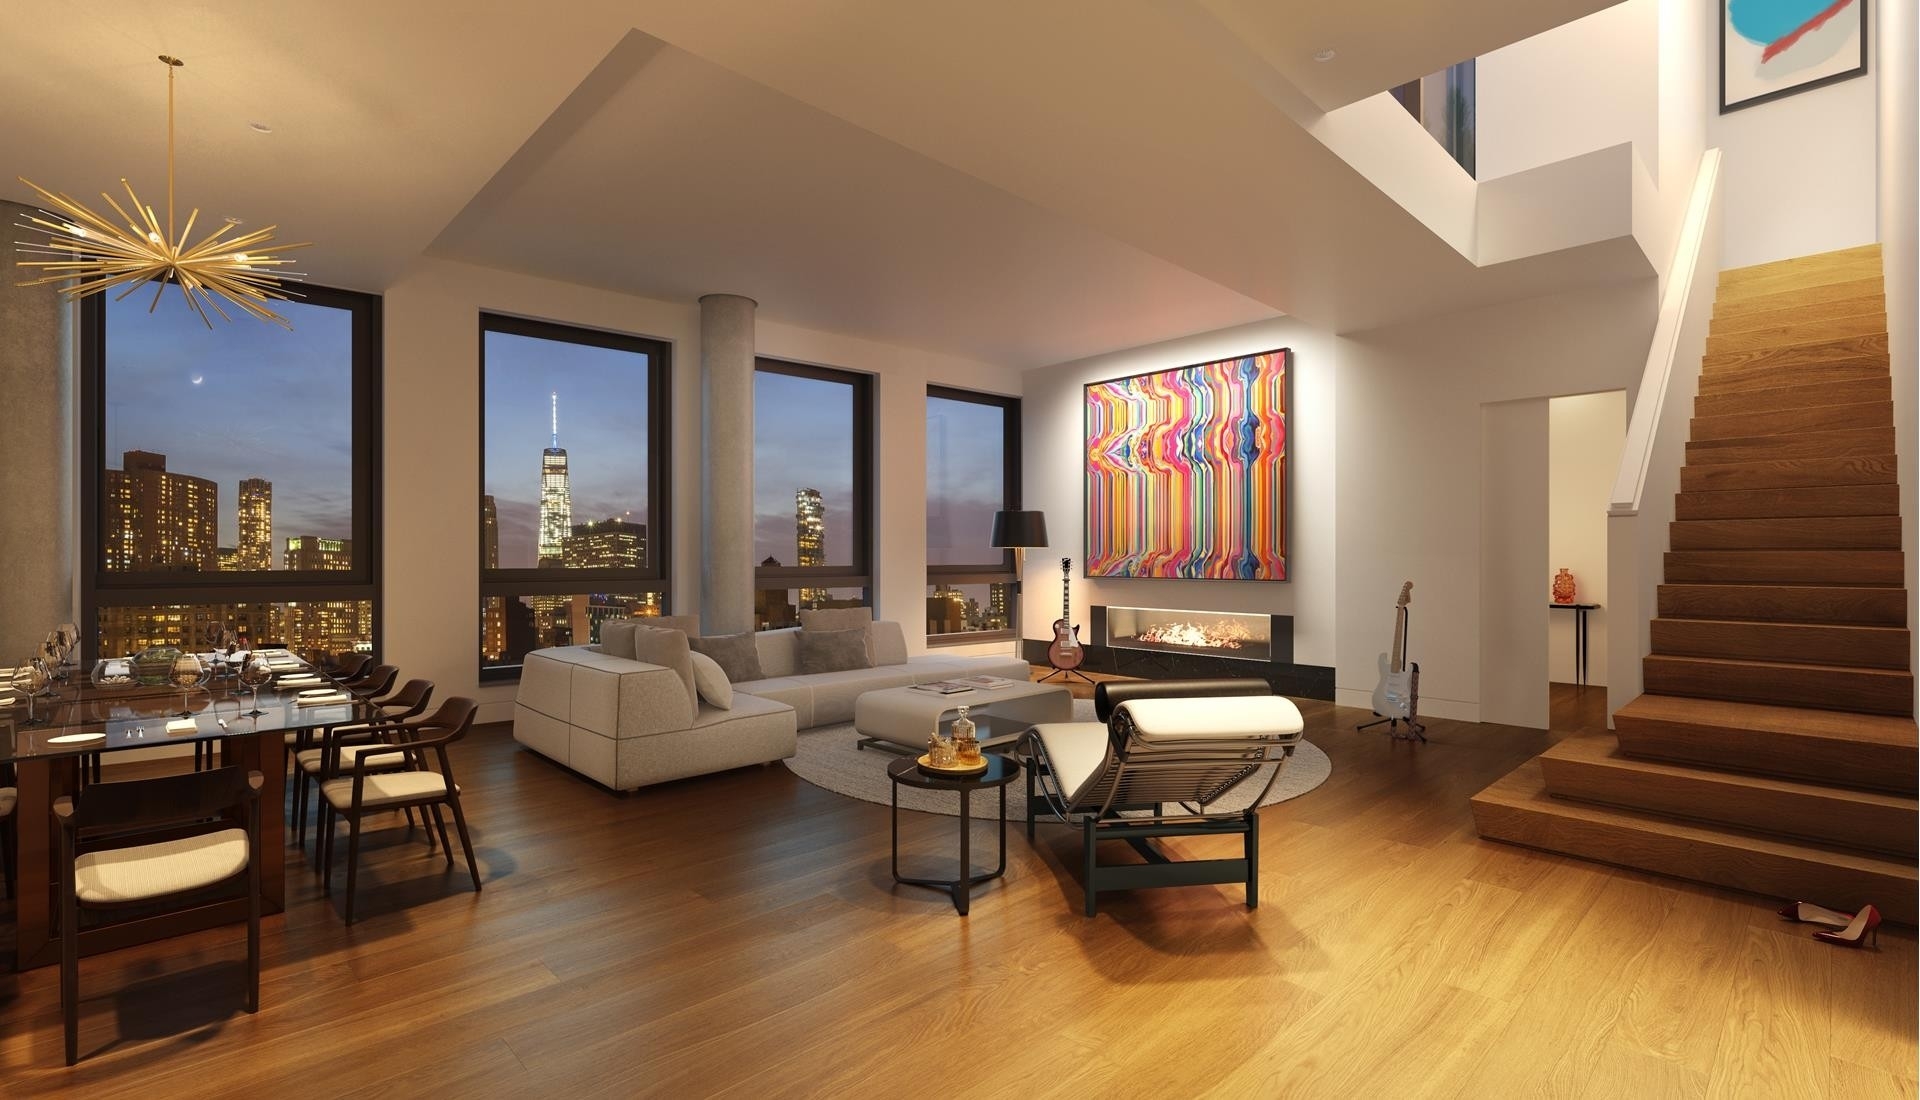 9. Condominiums for Sale at Essex Crossing, 242 BROOME ST, 14A Lower East Side, New York, New York 10002